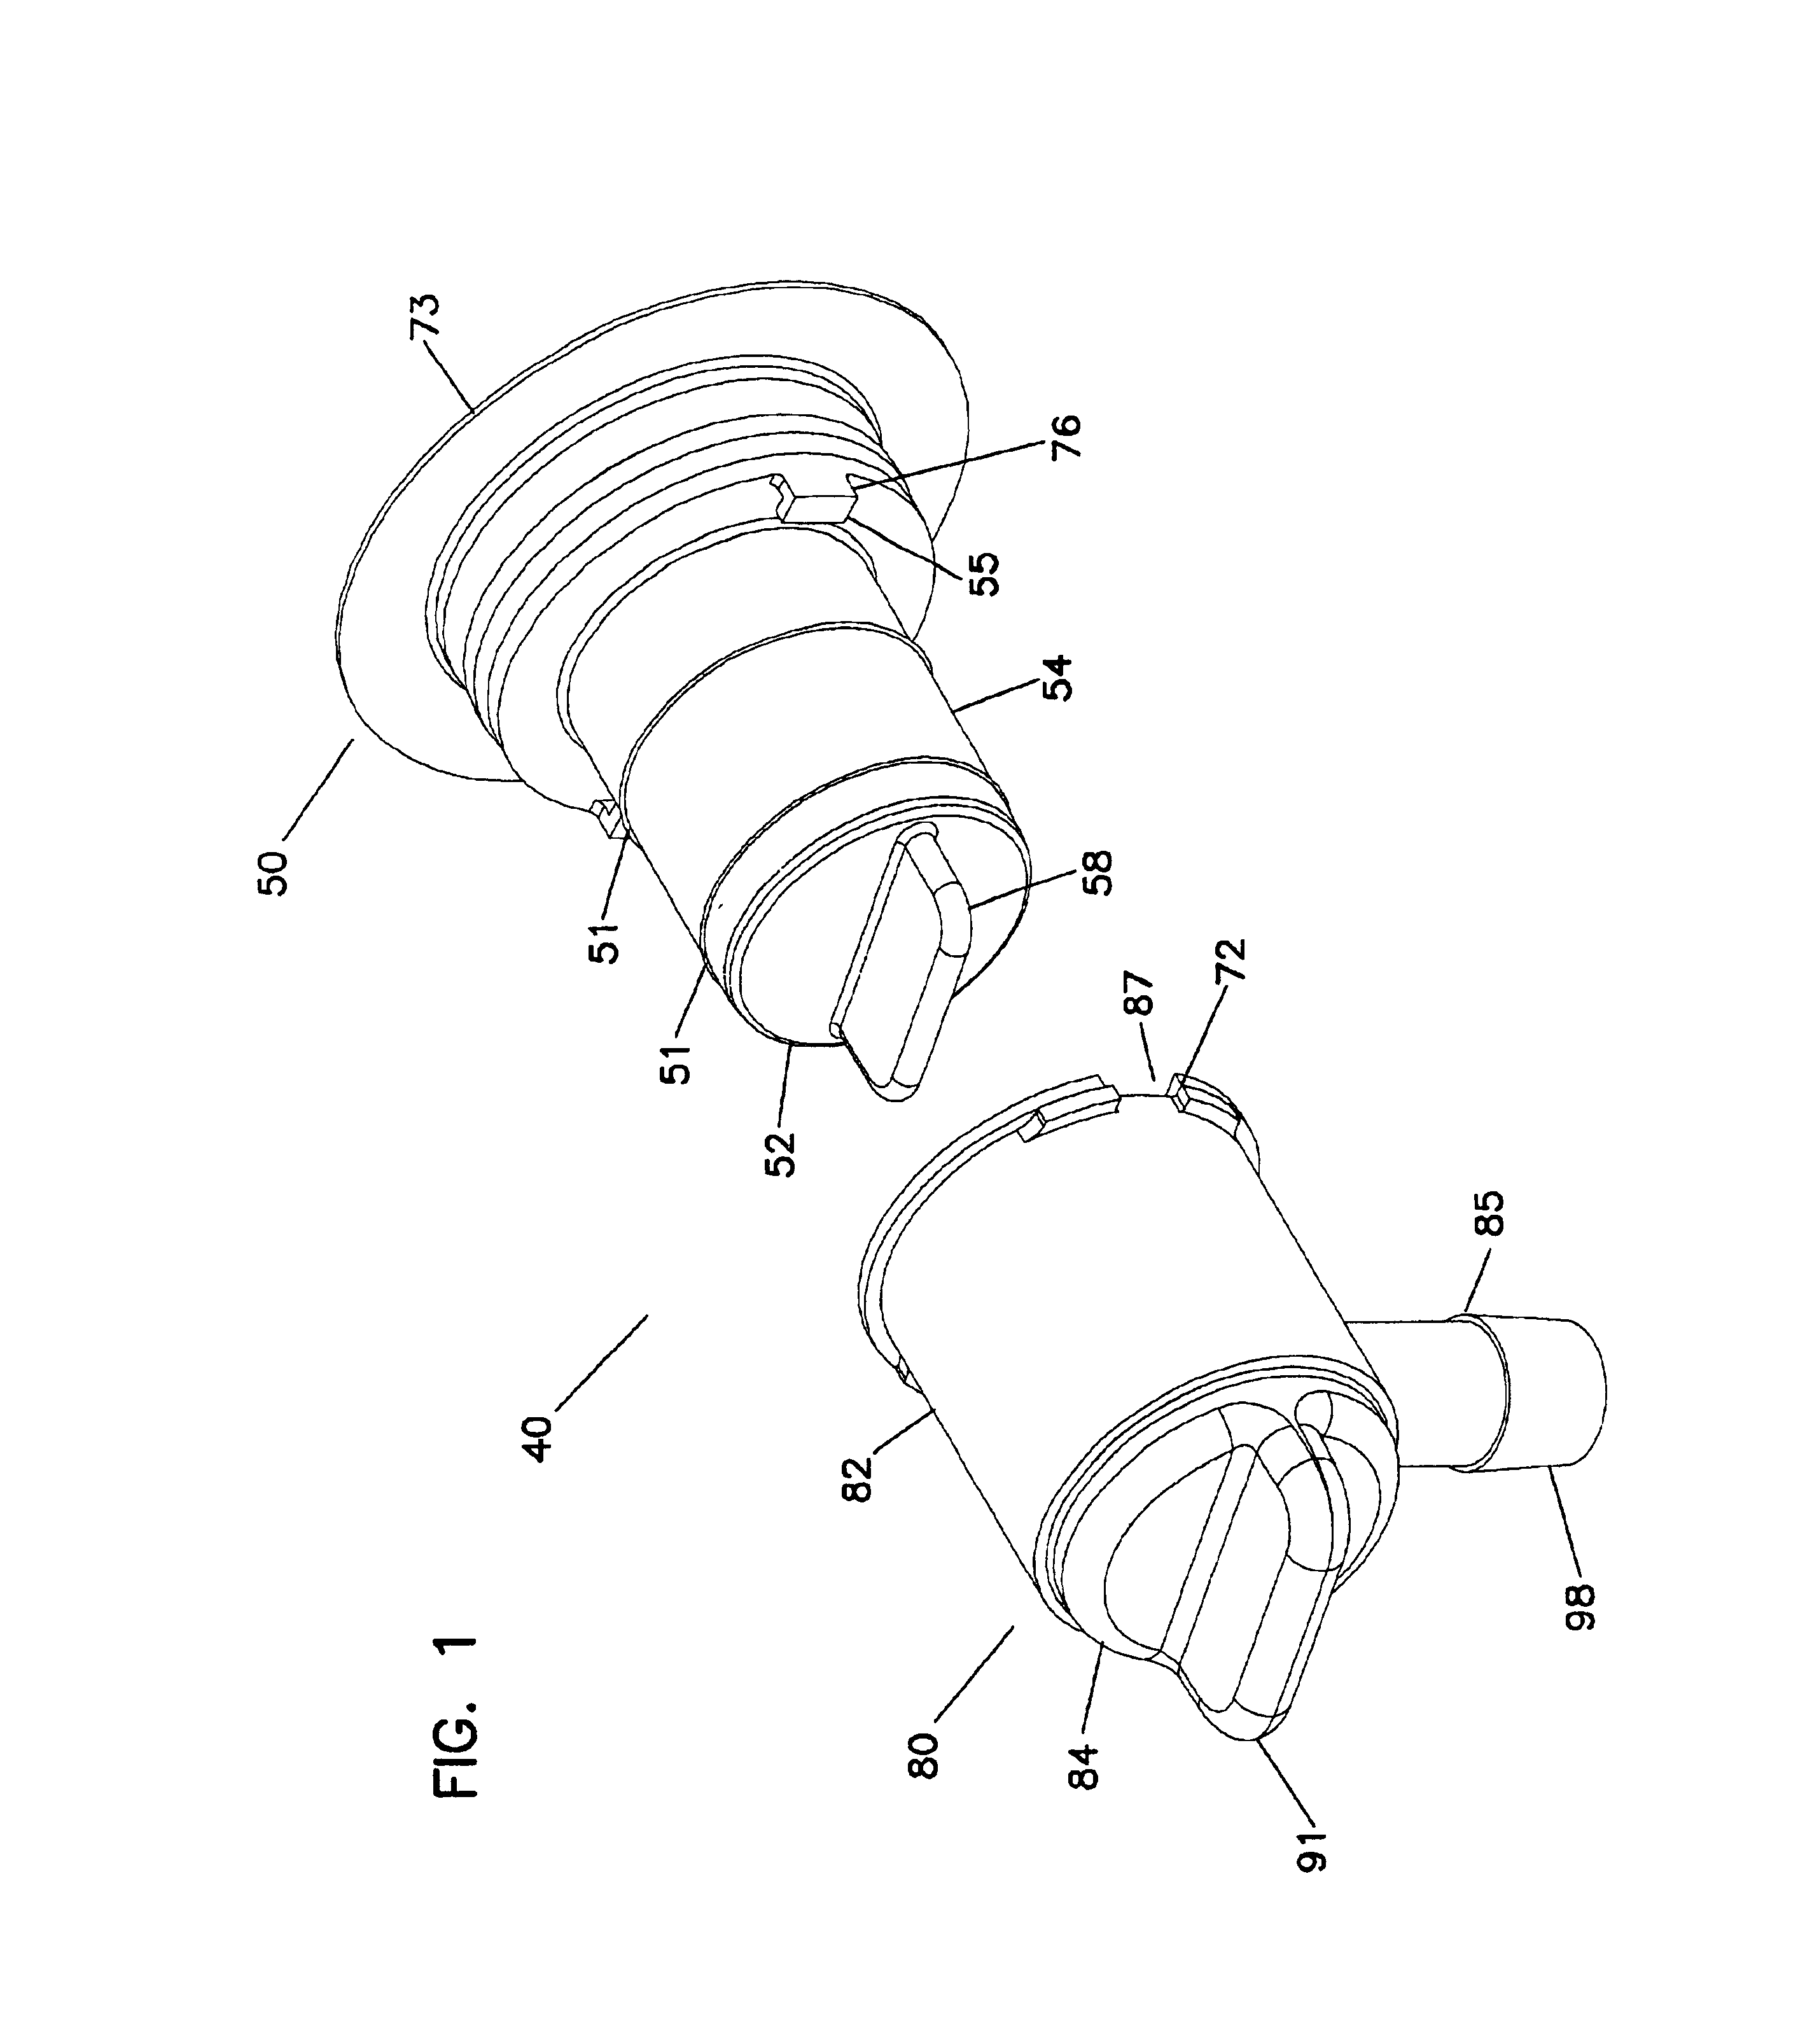 Coupling and closure apparatus for dispensing valve assembly